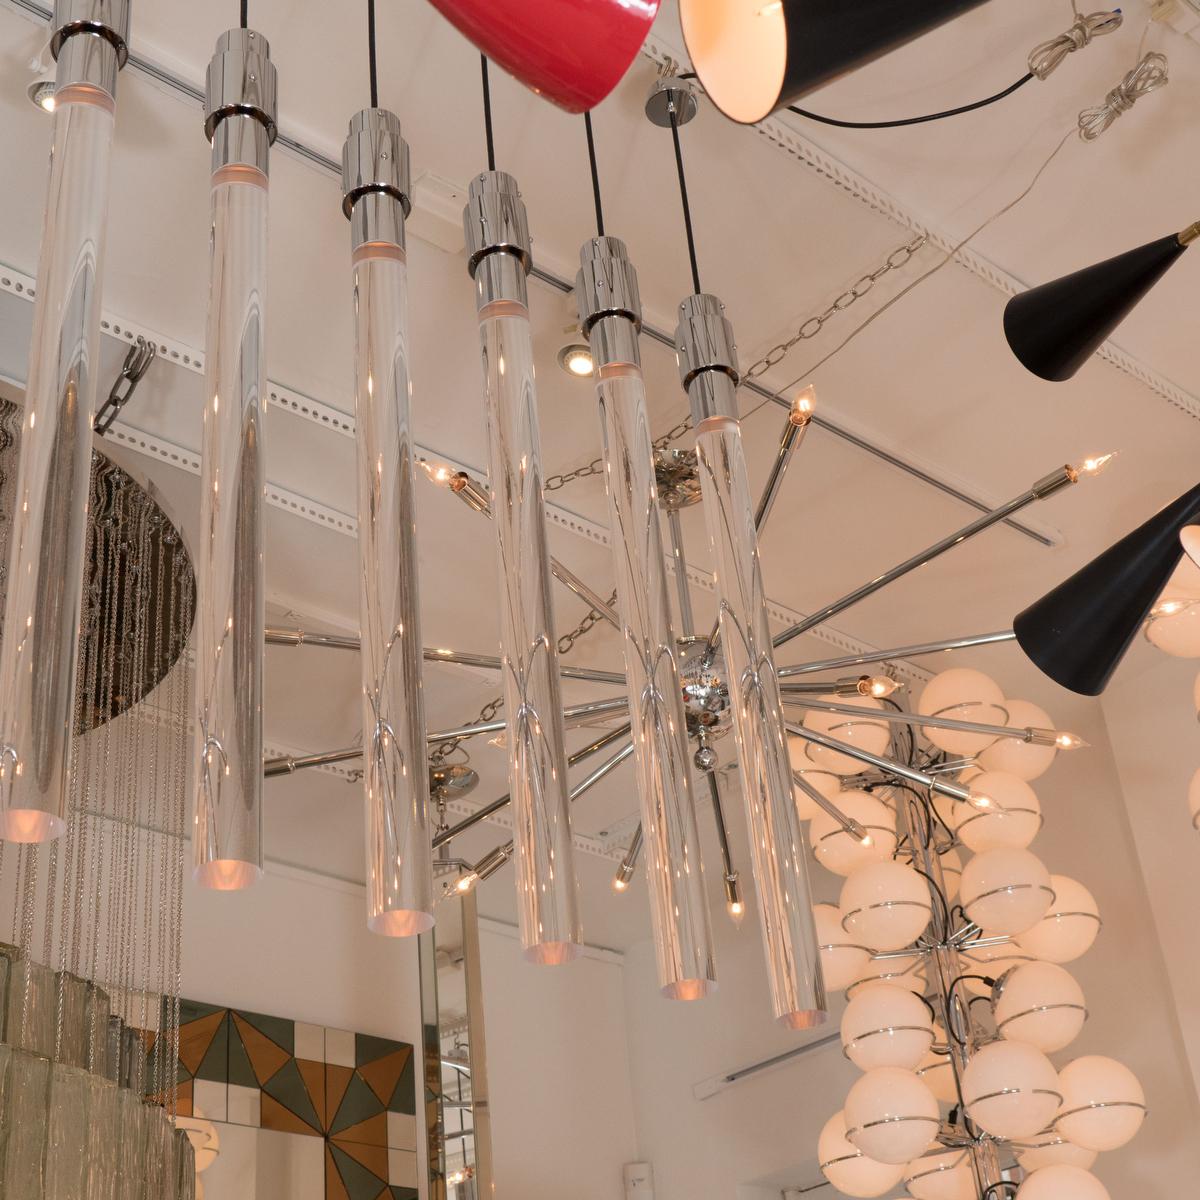 Tubular steel and Lucite pendant ceiling fixture by Mangiarotti.